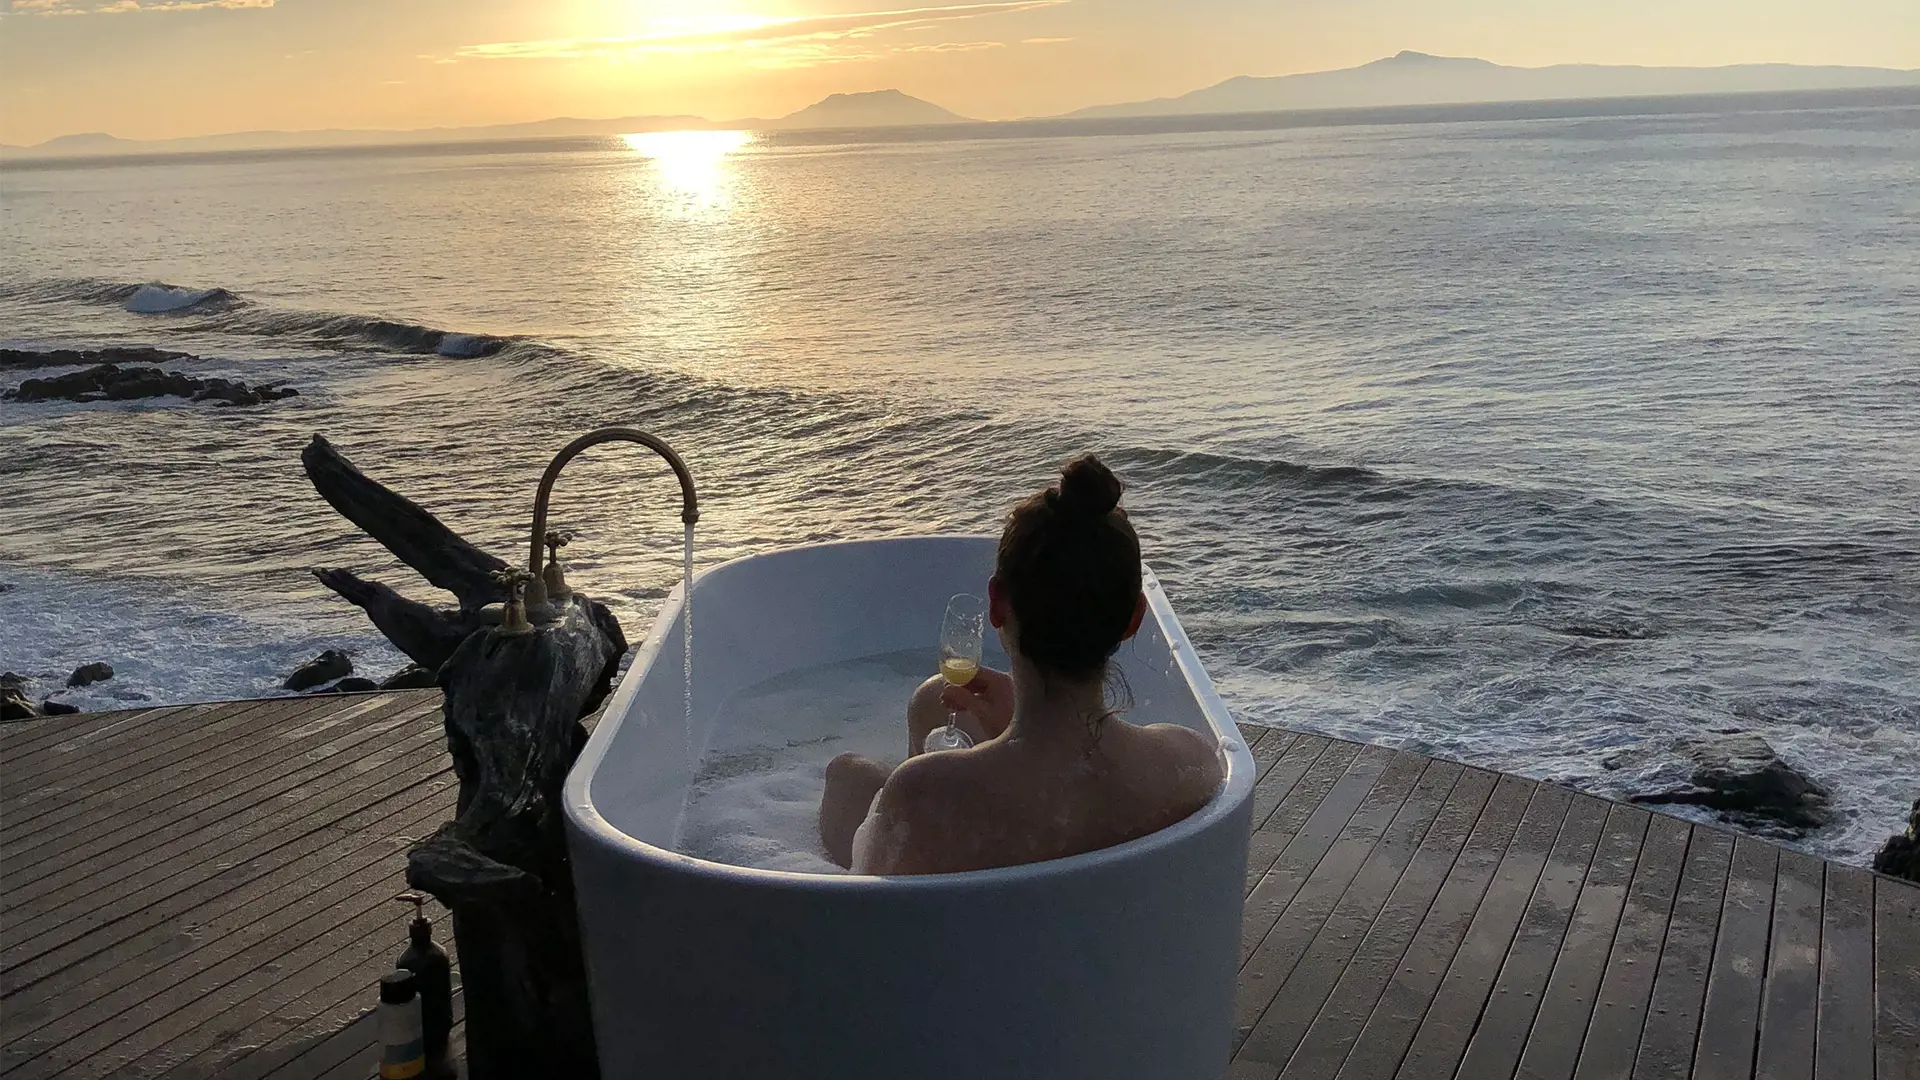 A woman sits in a white modern bath tub sitting on a wooden platform overlooking the beach and ocean at sunset.